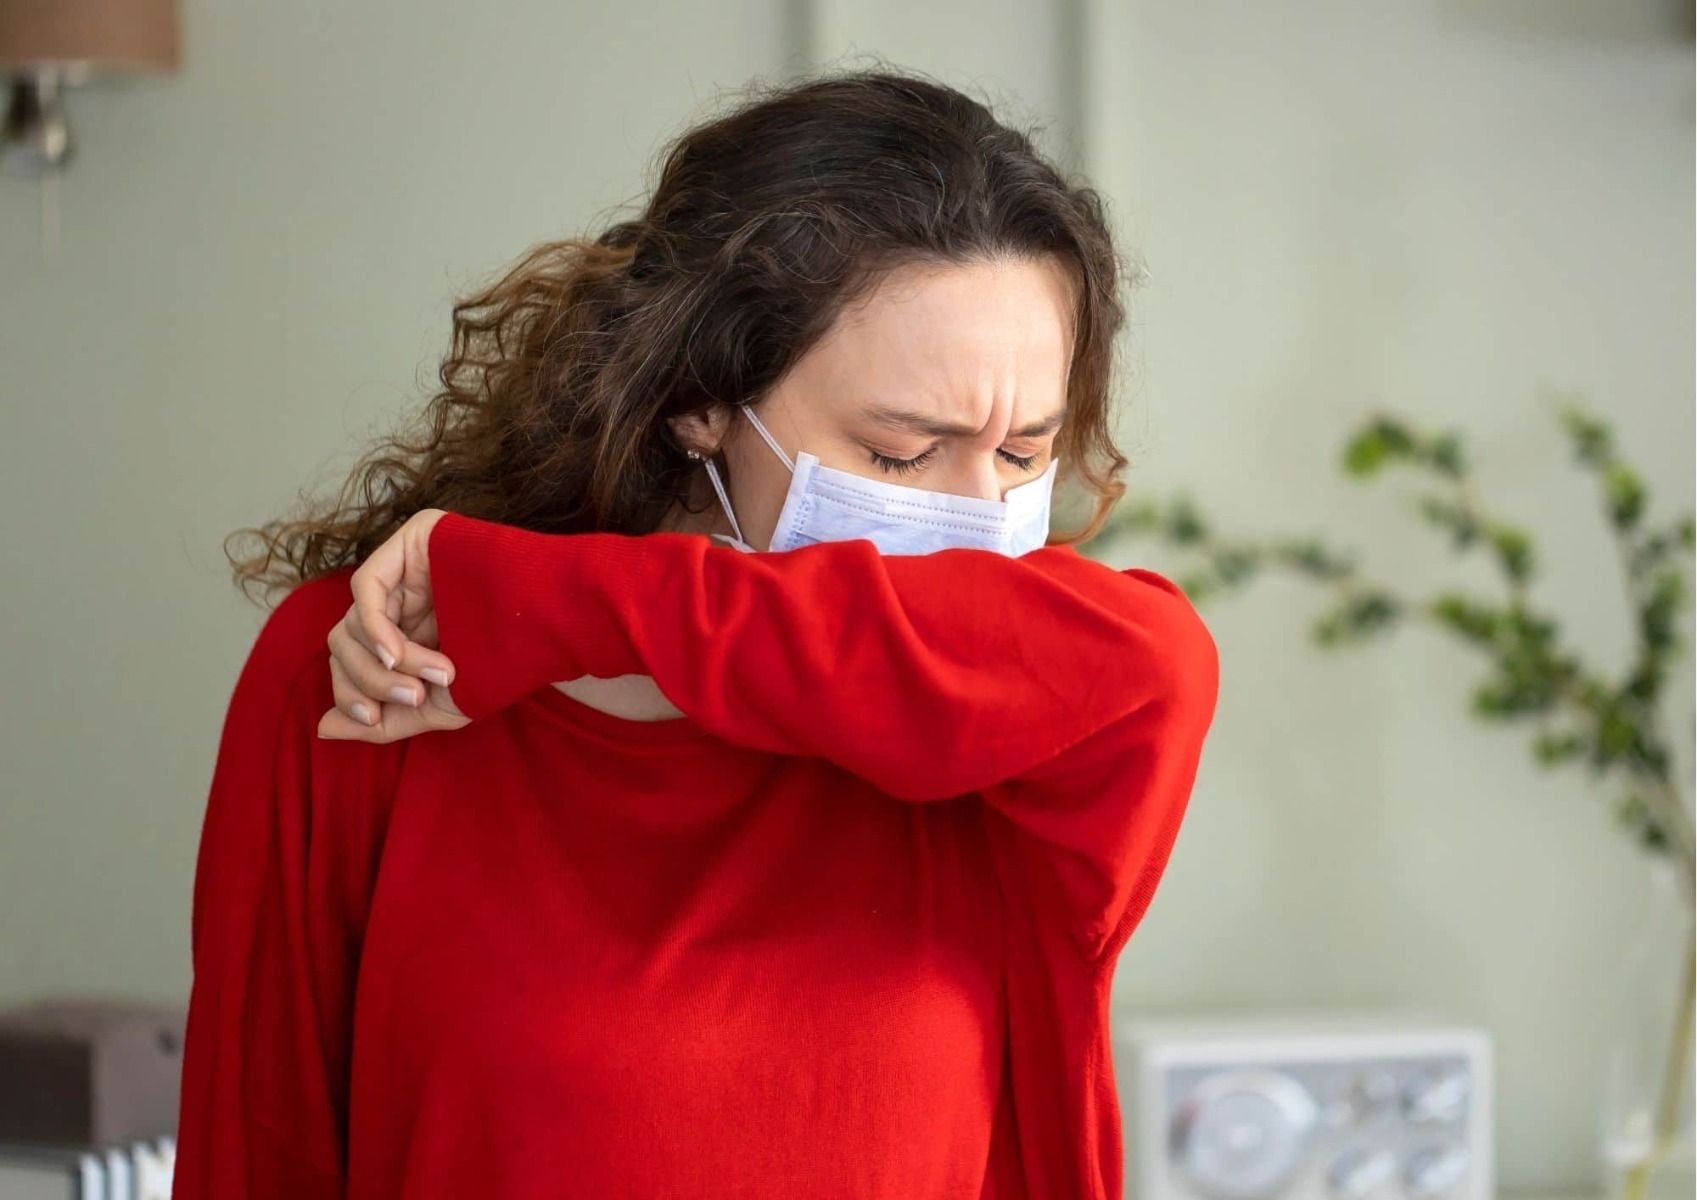 coughing in elbow to prevent covid contamination